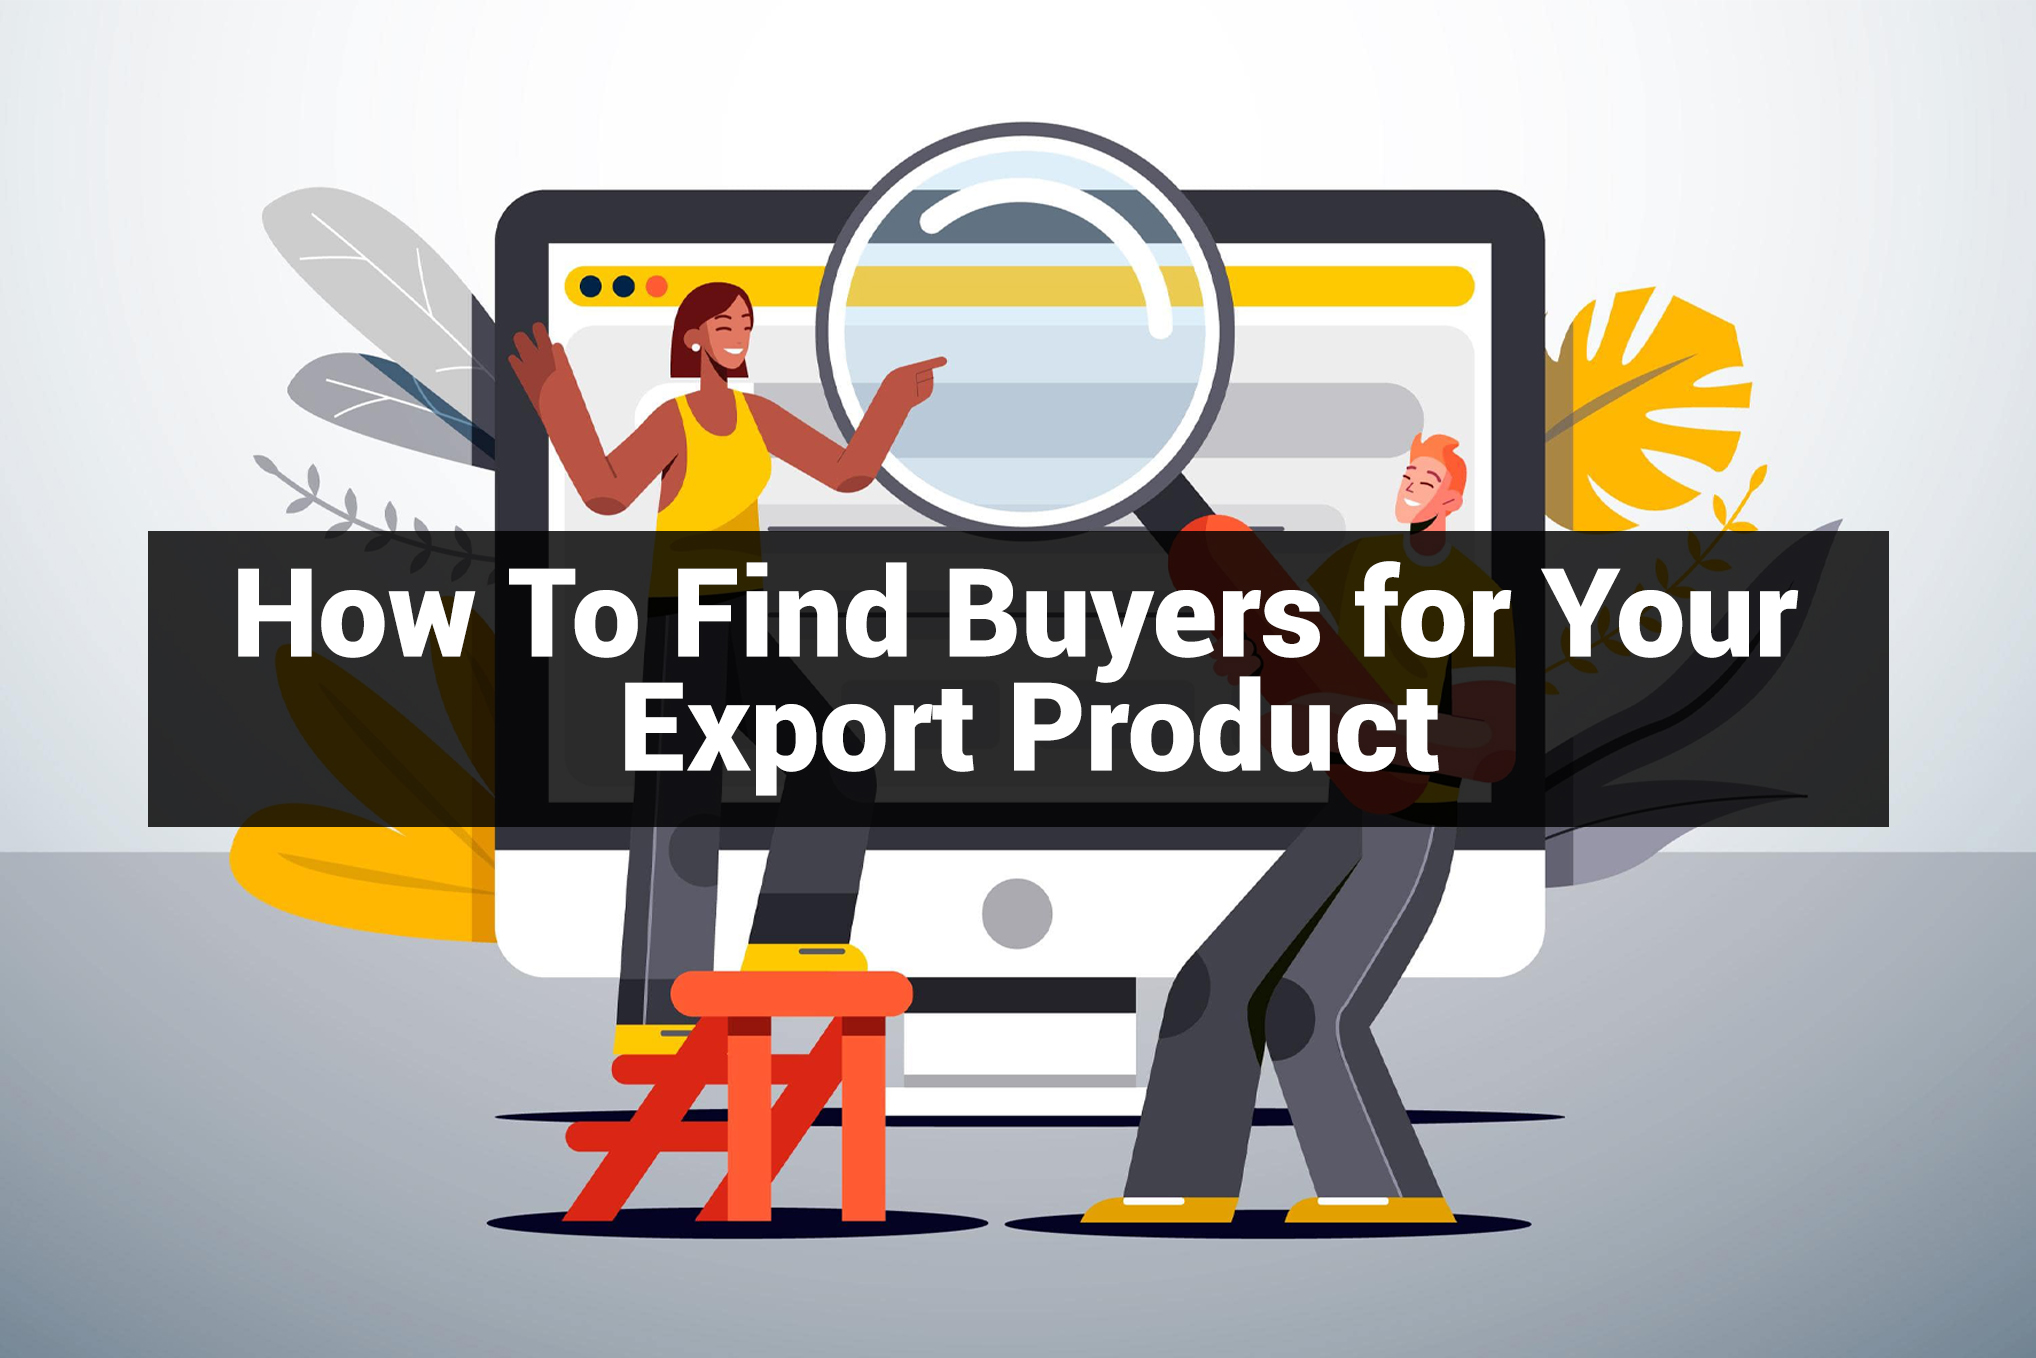 How To Find Buyers for Your Export Products